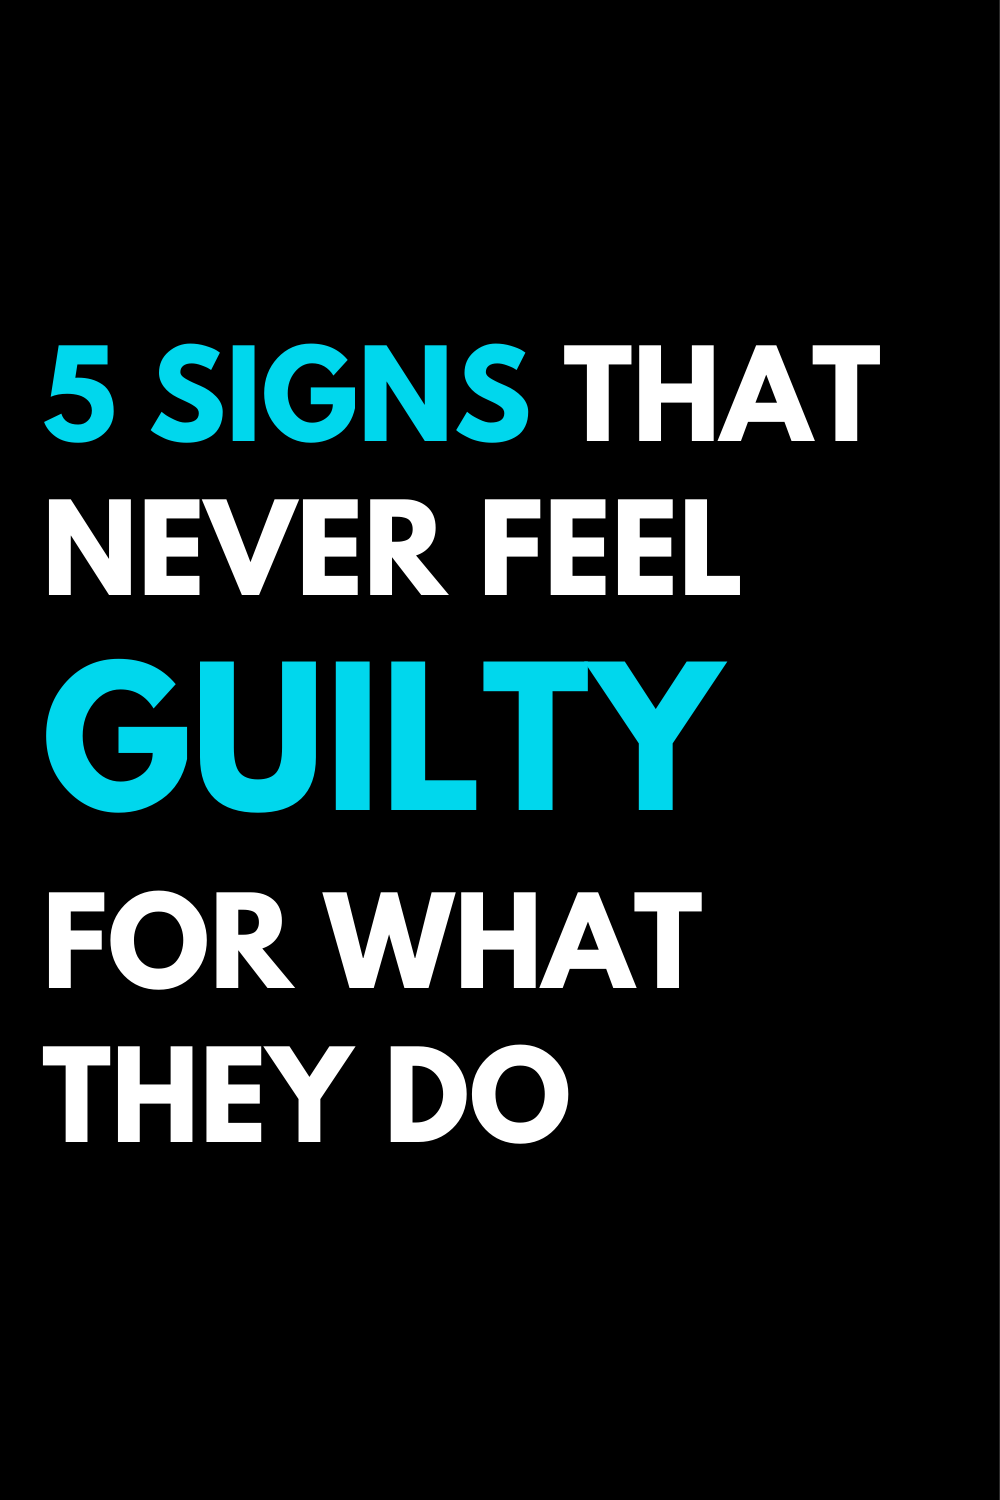 5 signs that never feel guilty for what they do